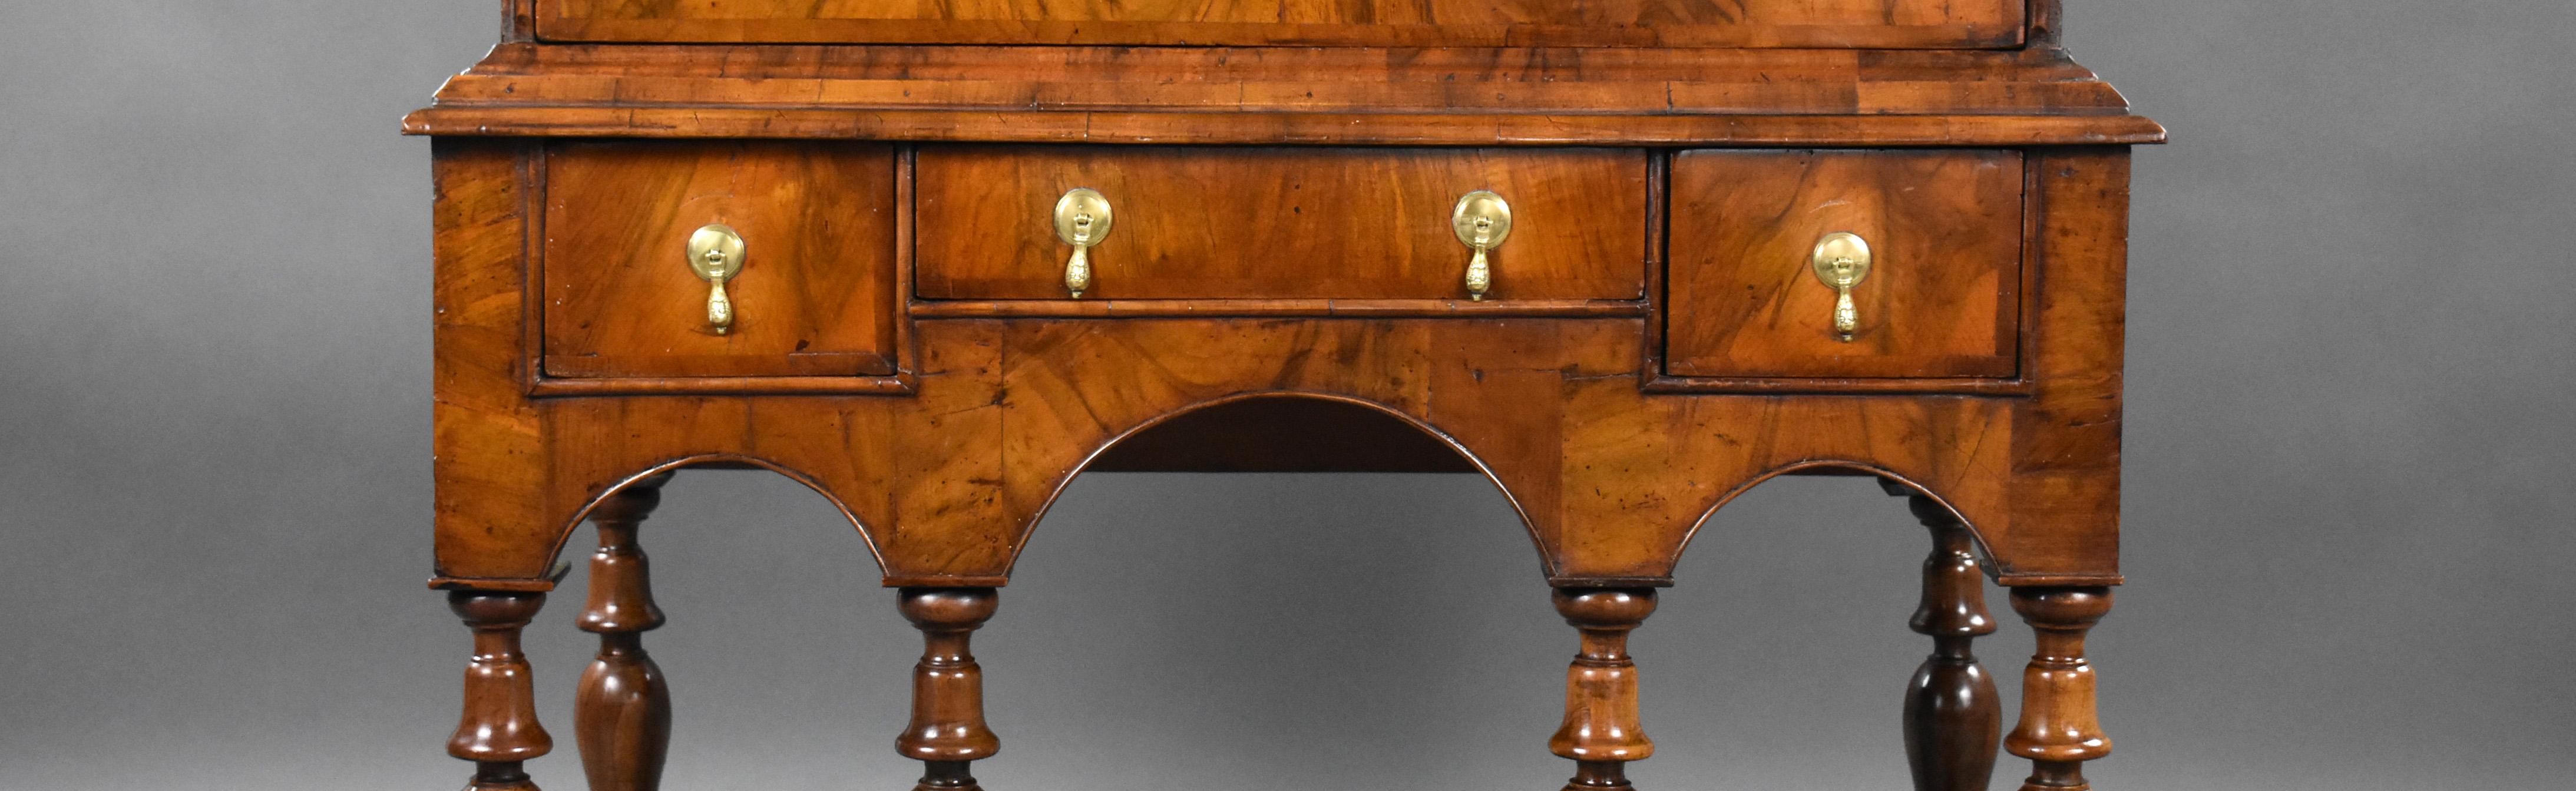 Early 18th Century English William & Mary Walnut Chest on Stand 2